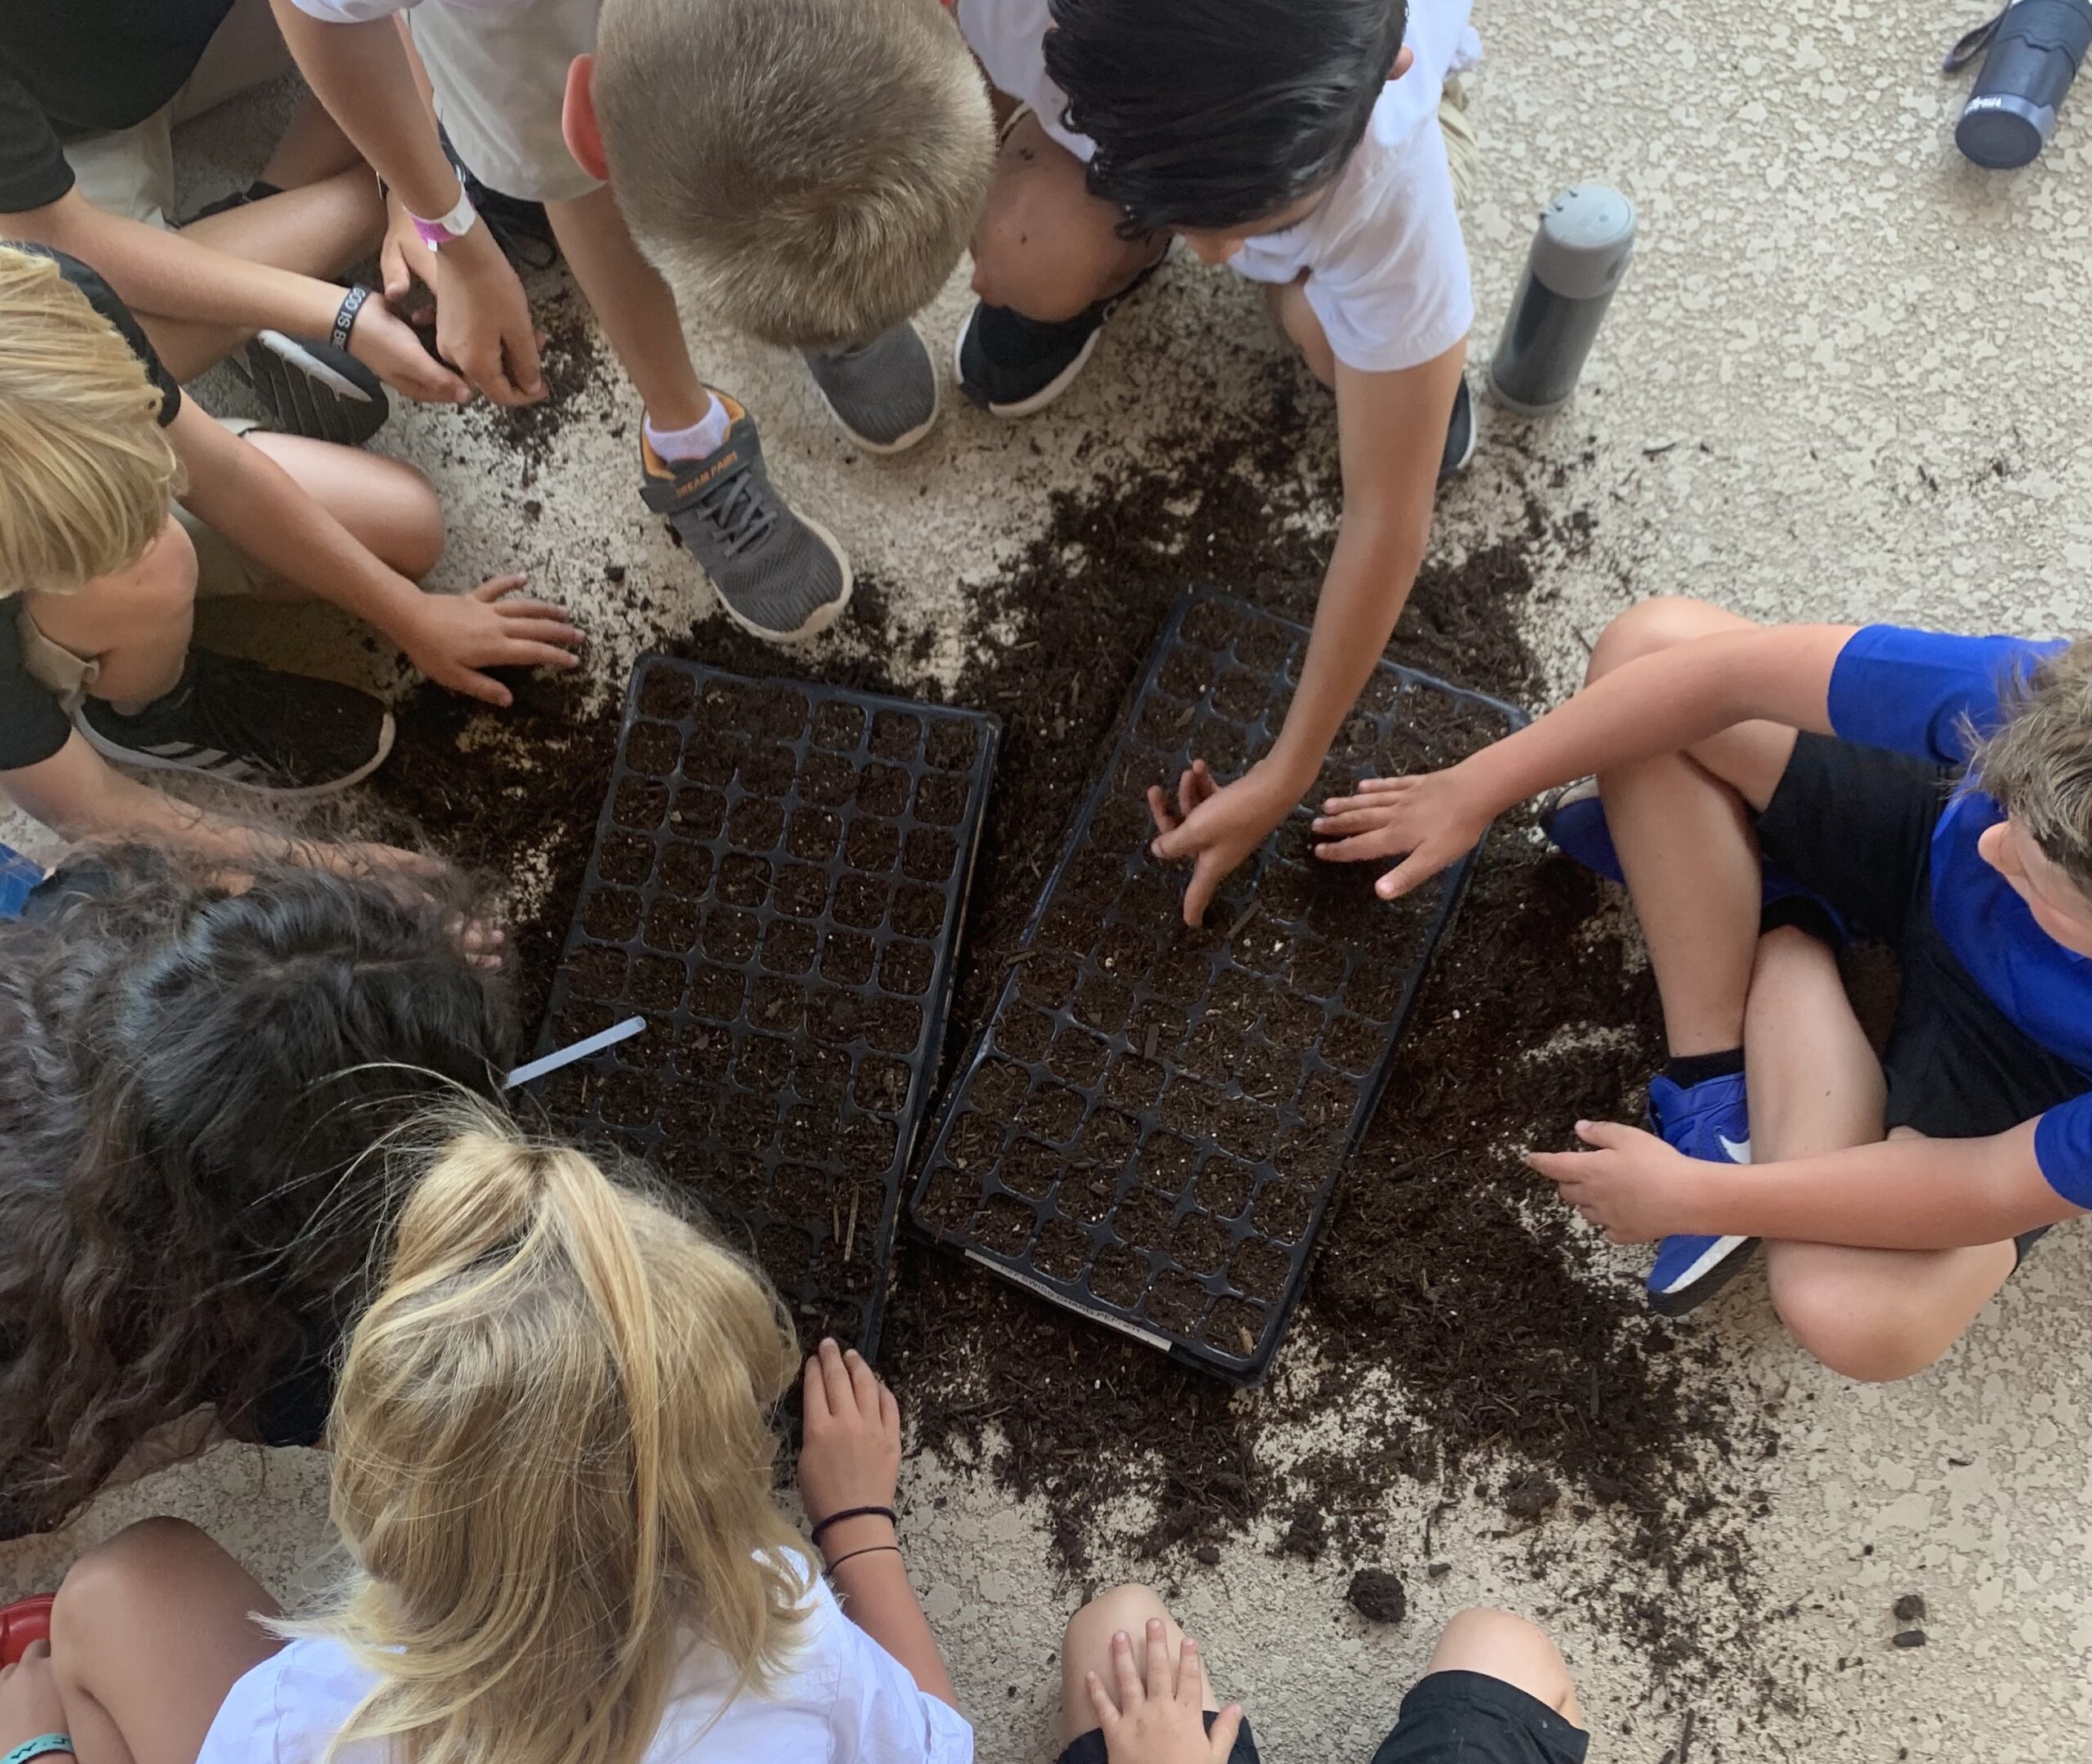 Students planting seeds.